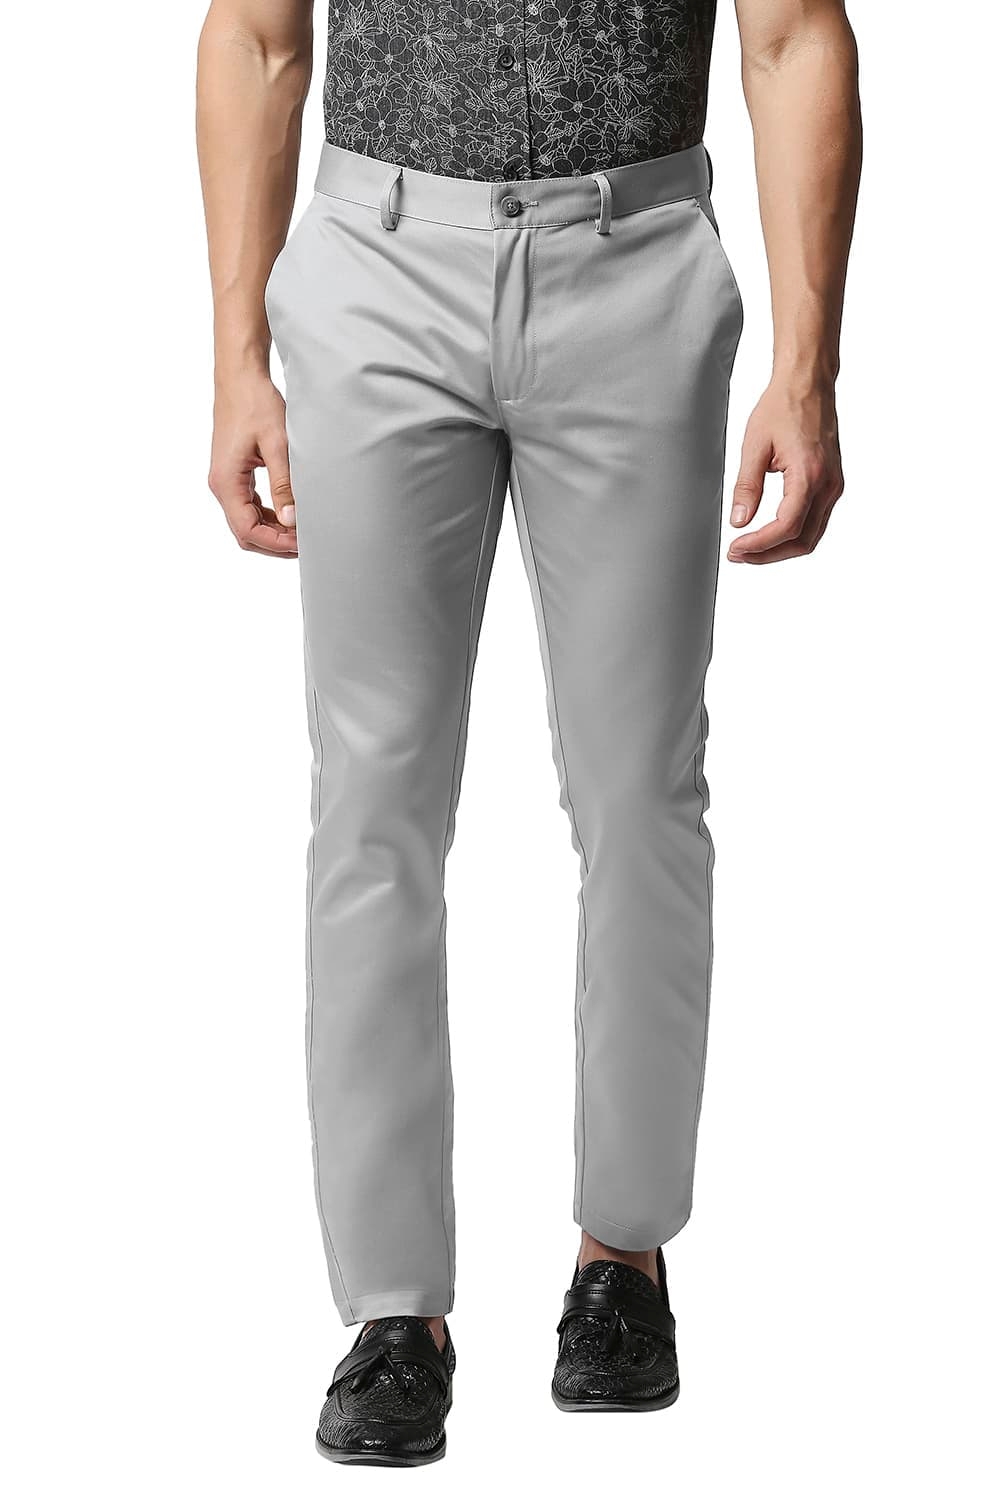 Basics Tapered Fit Grey Satin Trousers